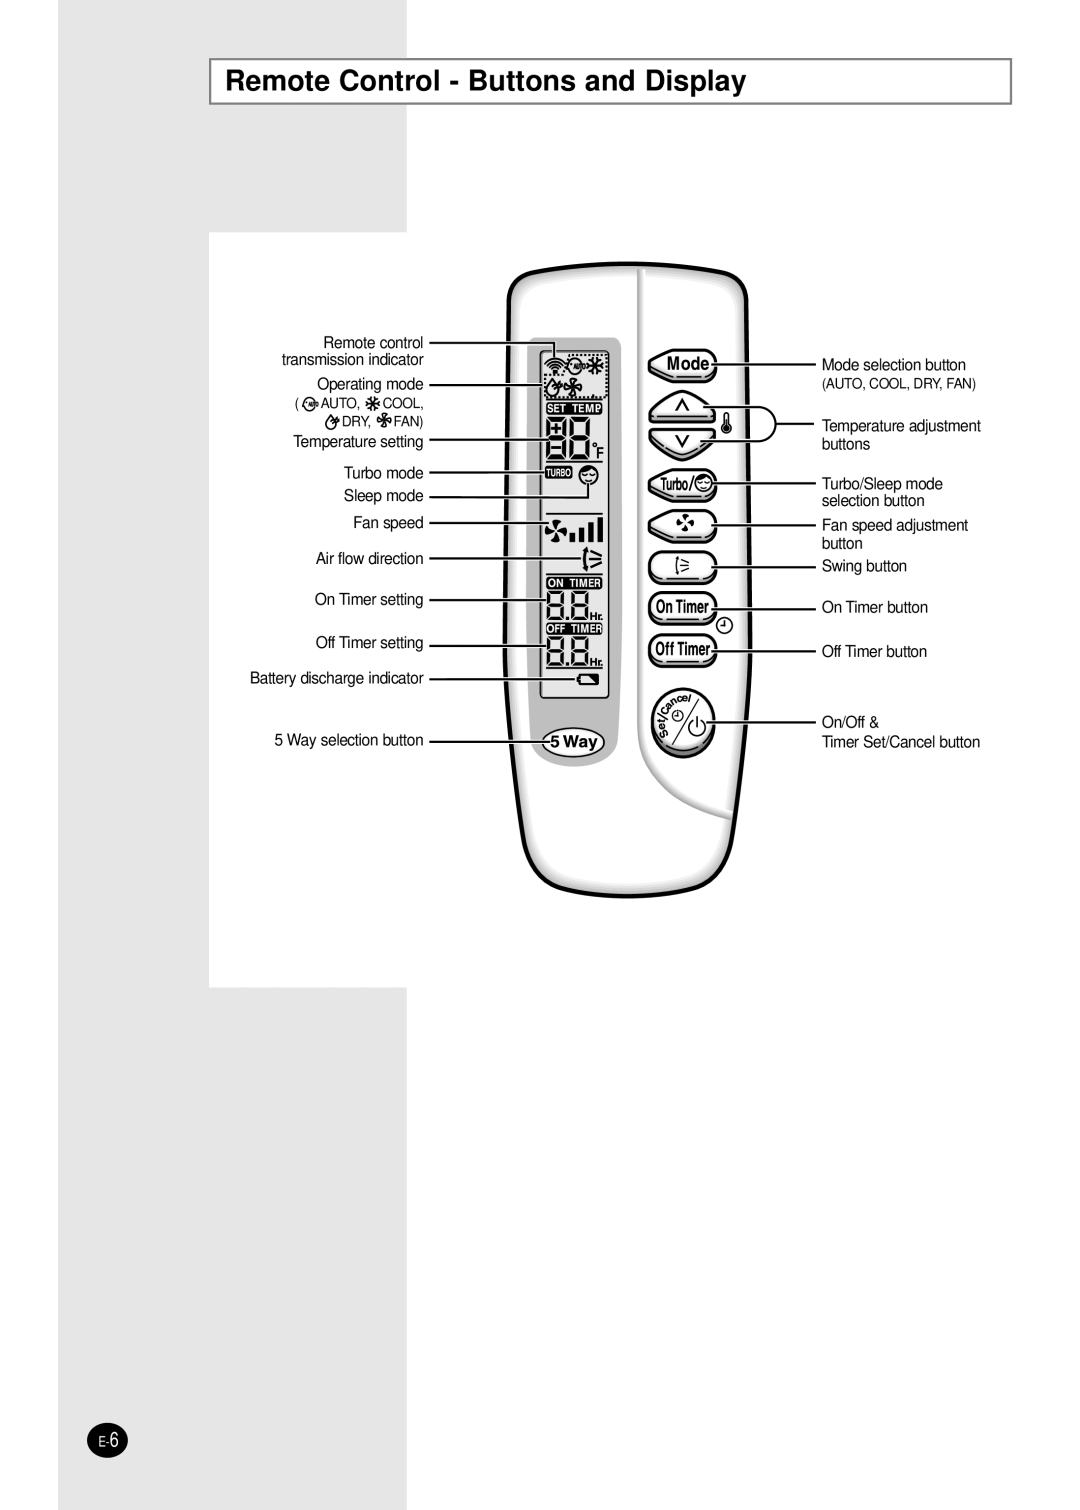 Samsung UM18B1C2, UM26B1C2, UM27B1C3, AM27B1C13, AM27B1C07, AM26B1C13 installation manual Remote Control - Buttons and Display 